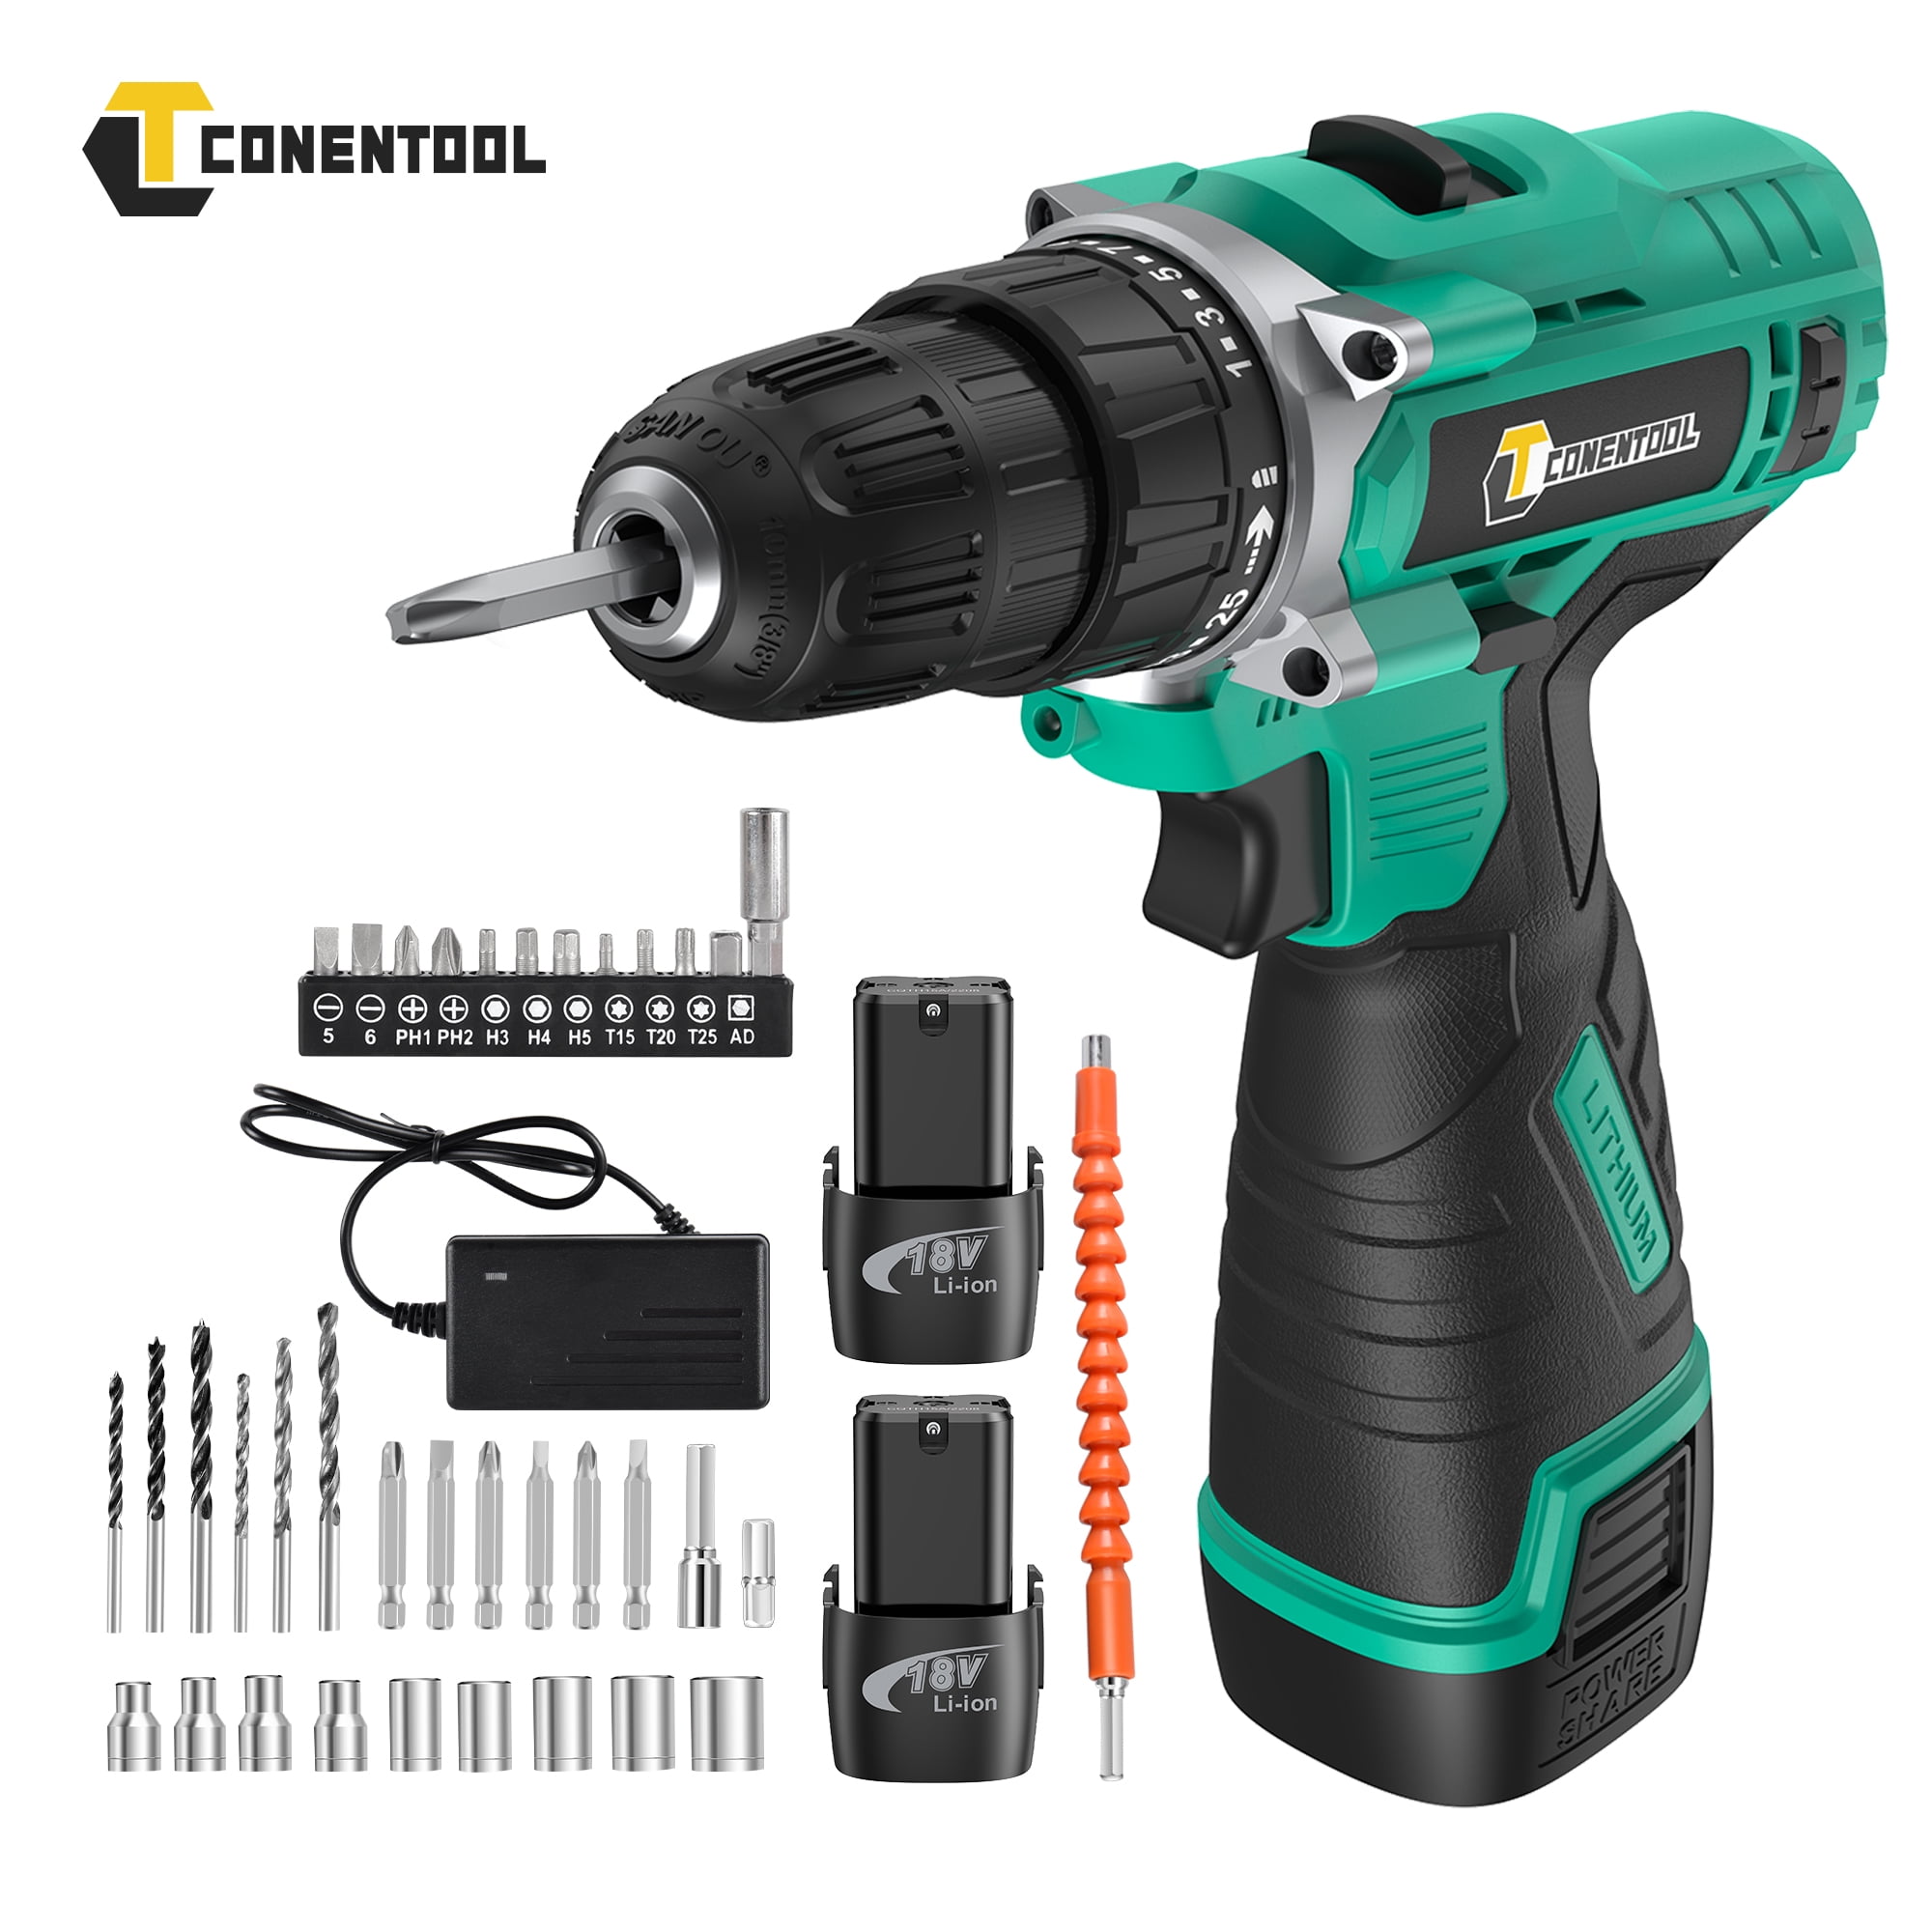 Senix 20 Volt MAX* Brushless 1/2-Inch Hammer Drill Driver, 2 Ah Battery, 2A Charger and Soft Bag Included, Pdhx2-m2, Blue